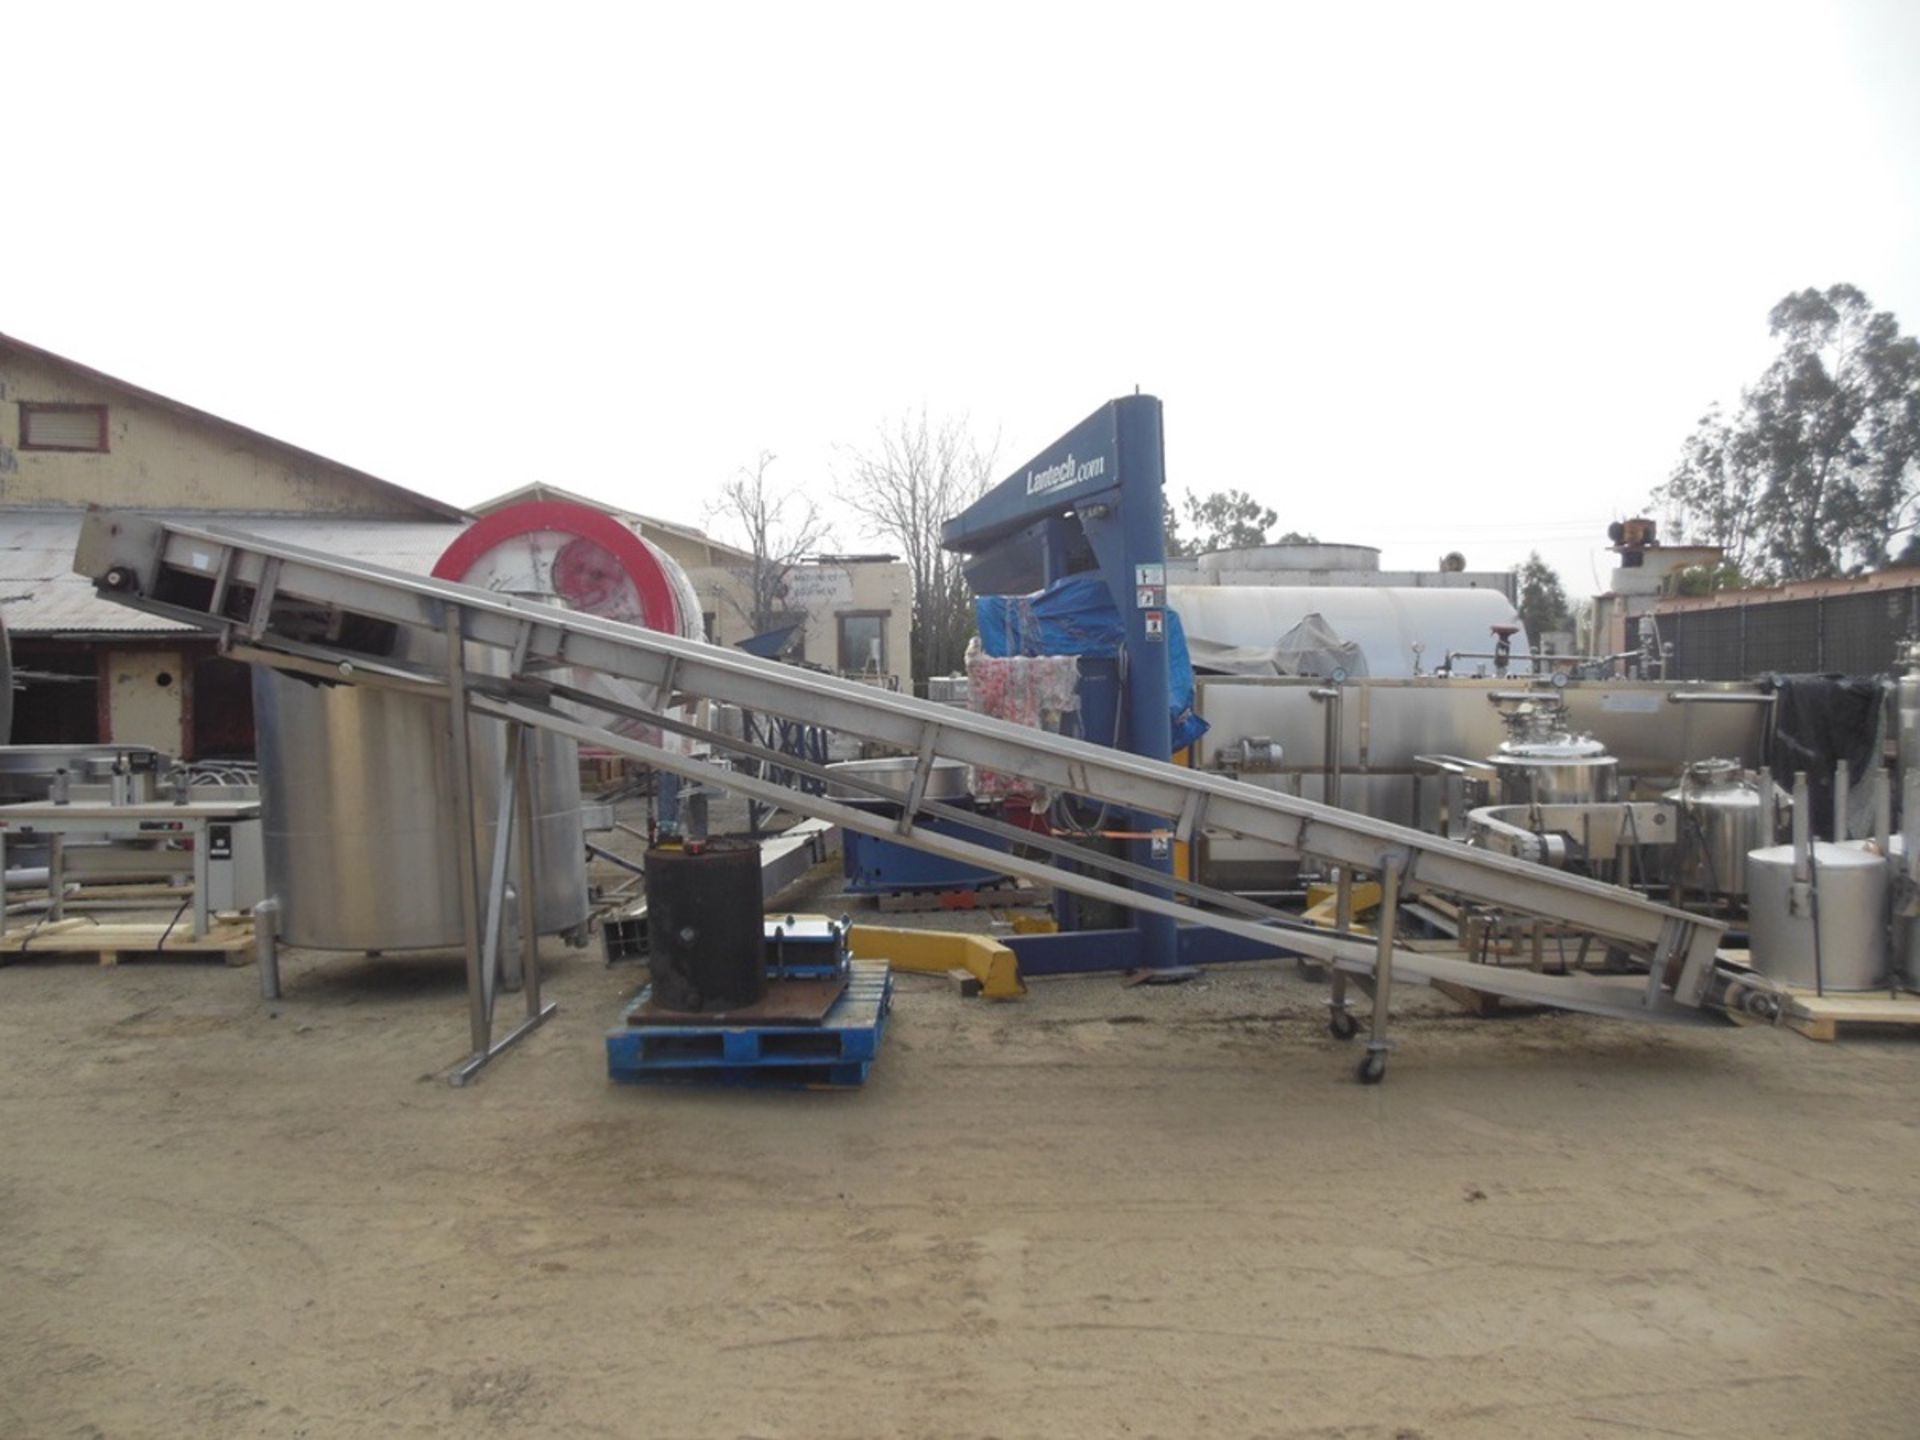 Incline Belt Conveyor, Approx 24in W x 22ft-6in L, Discharge Height 8 | San Dimas CA | Rig Fee: $200